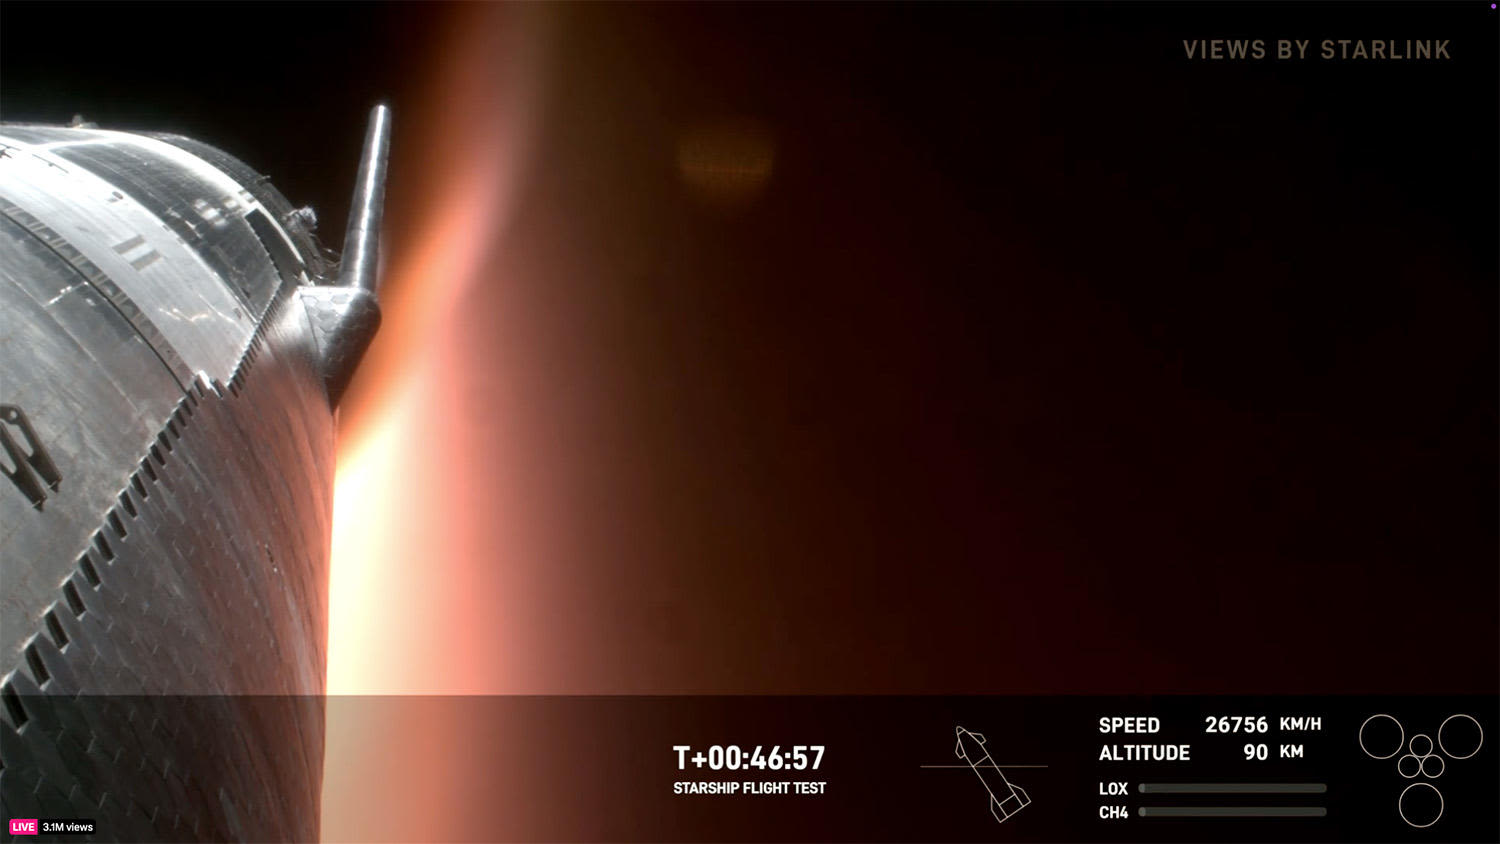 SpaceX's Super Heavy-Starship rocket launches on "epic" test flight